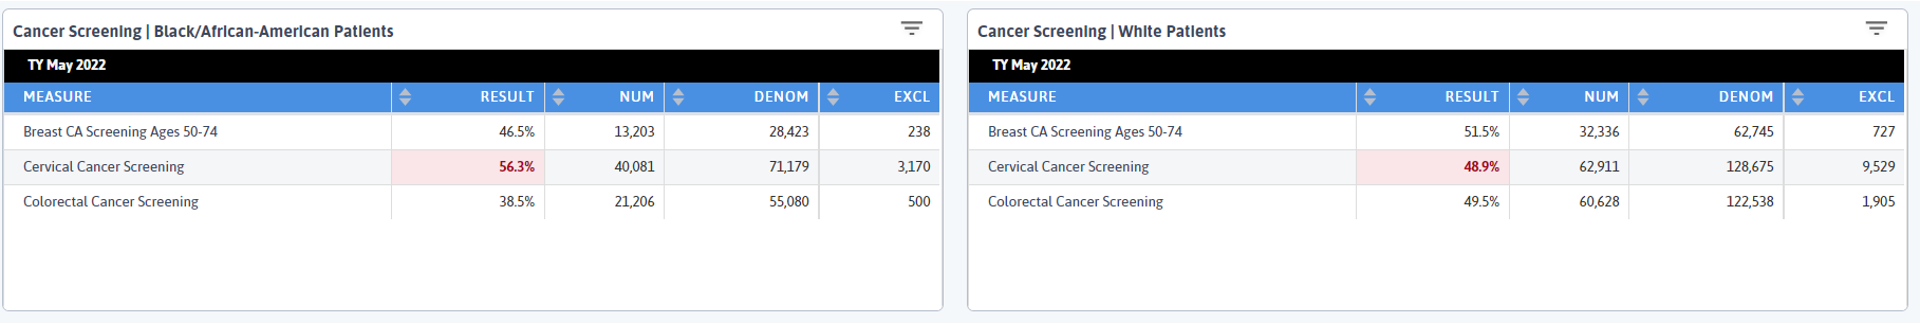 cancer_screening_results